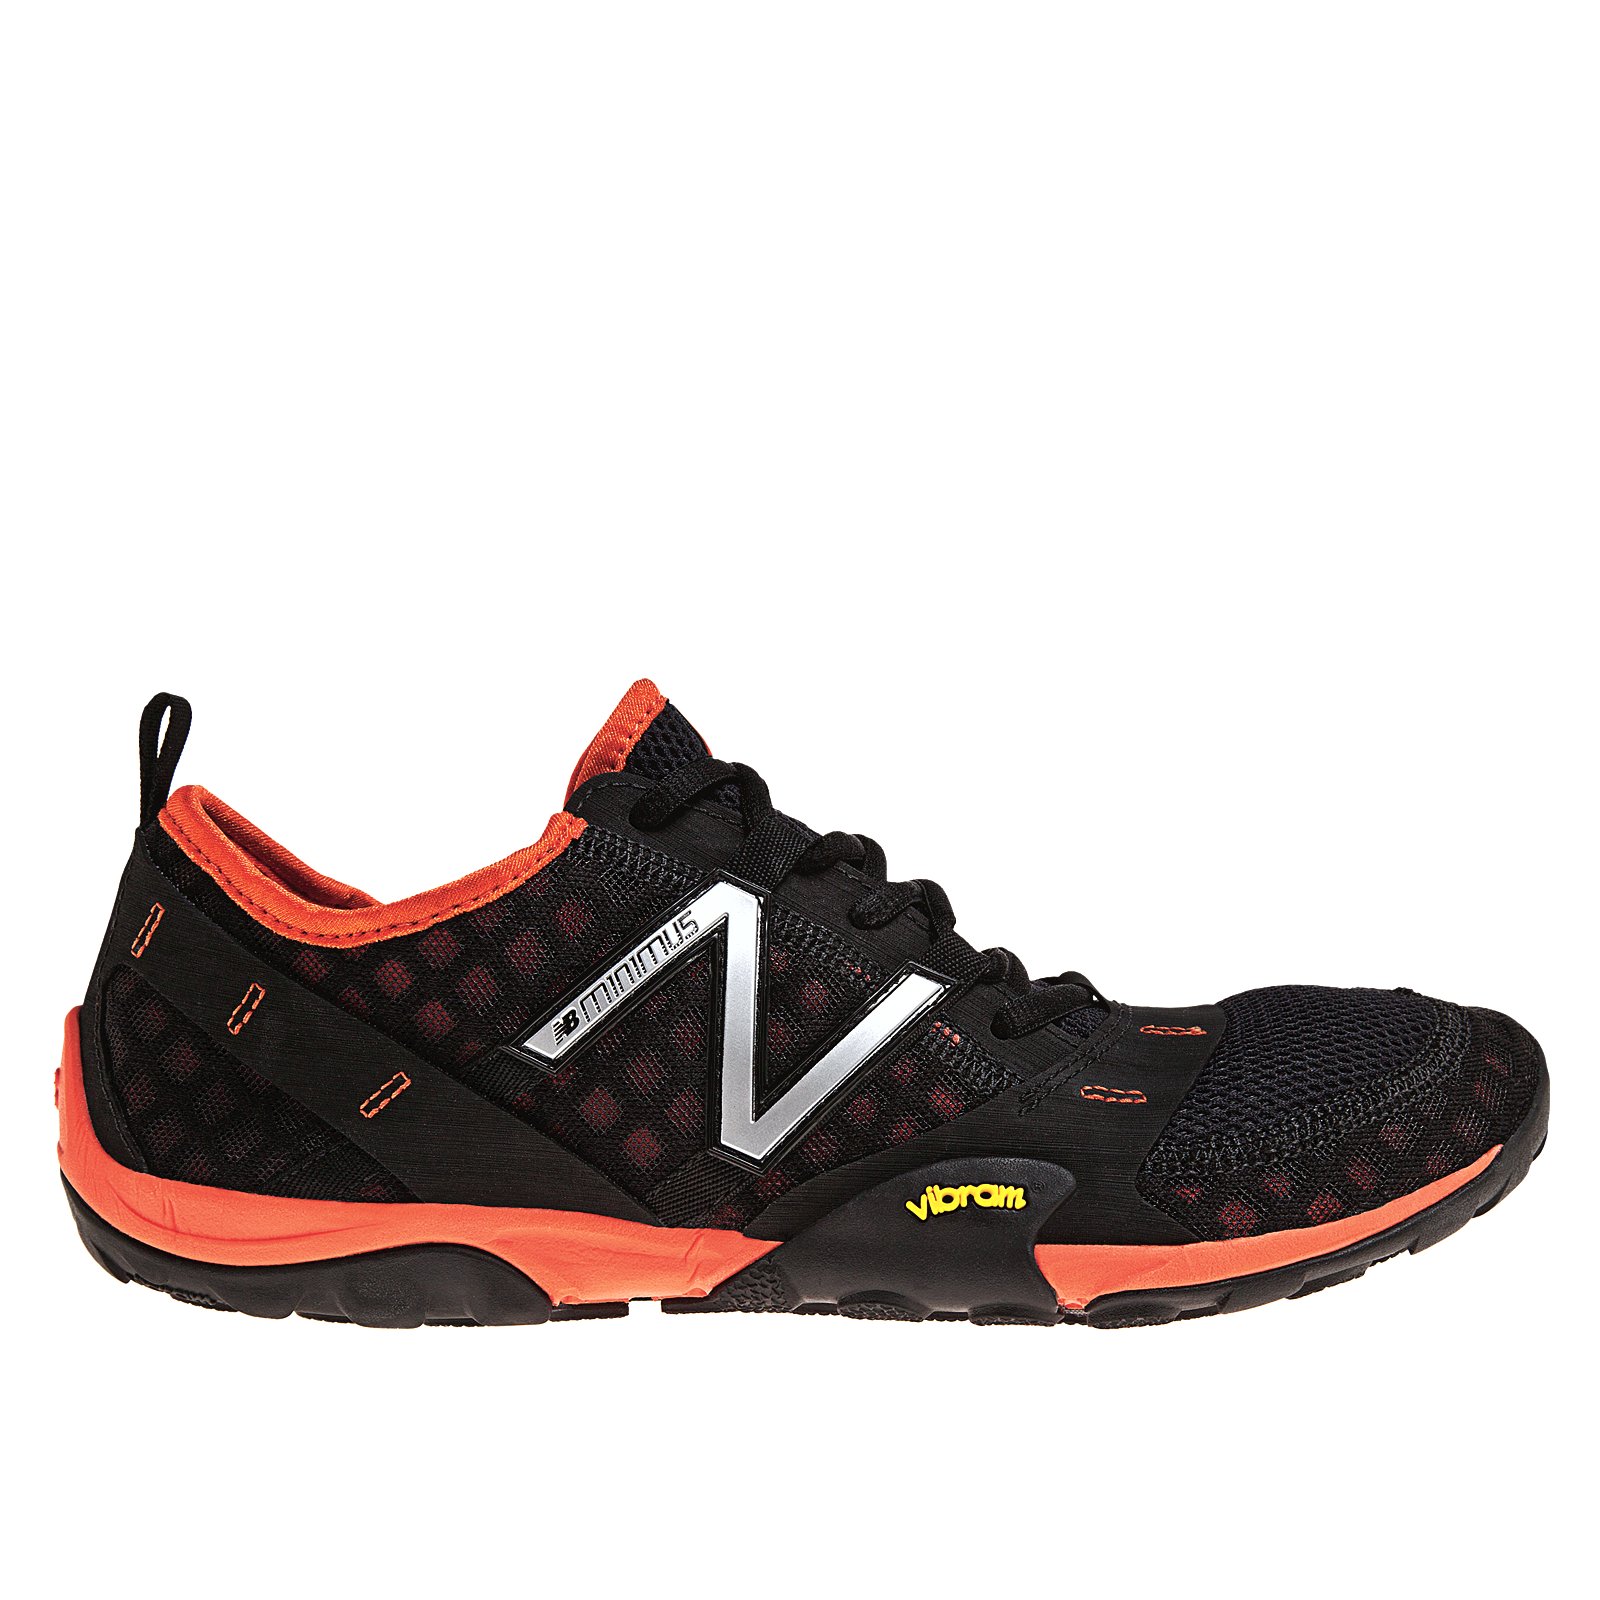 Delusions of Mediocrity: New Balance Minimus 10 Trail Shoes